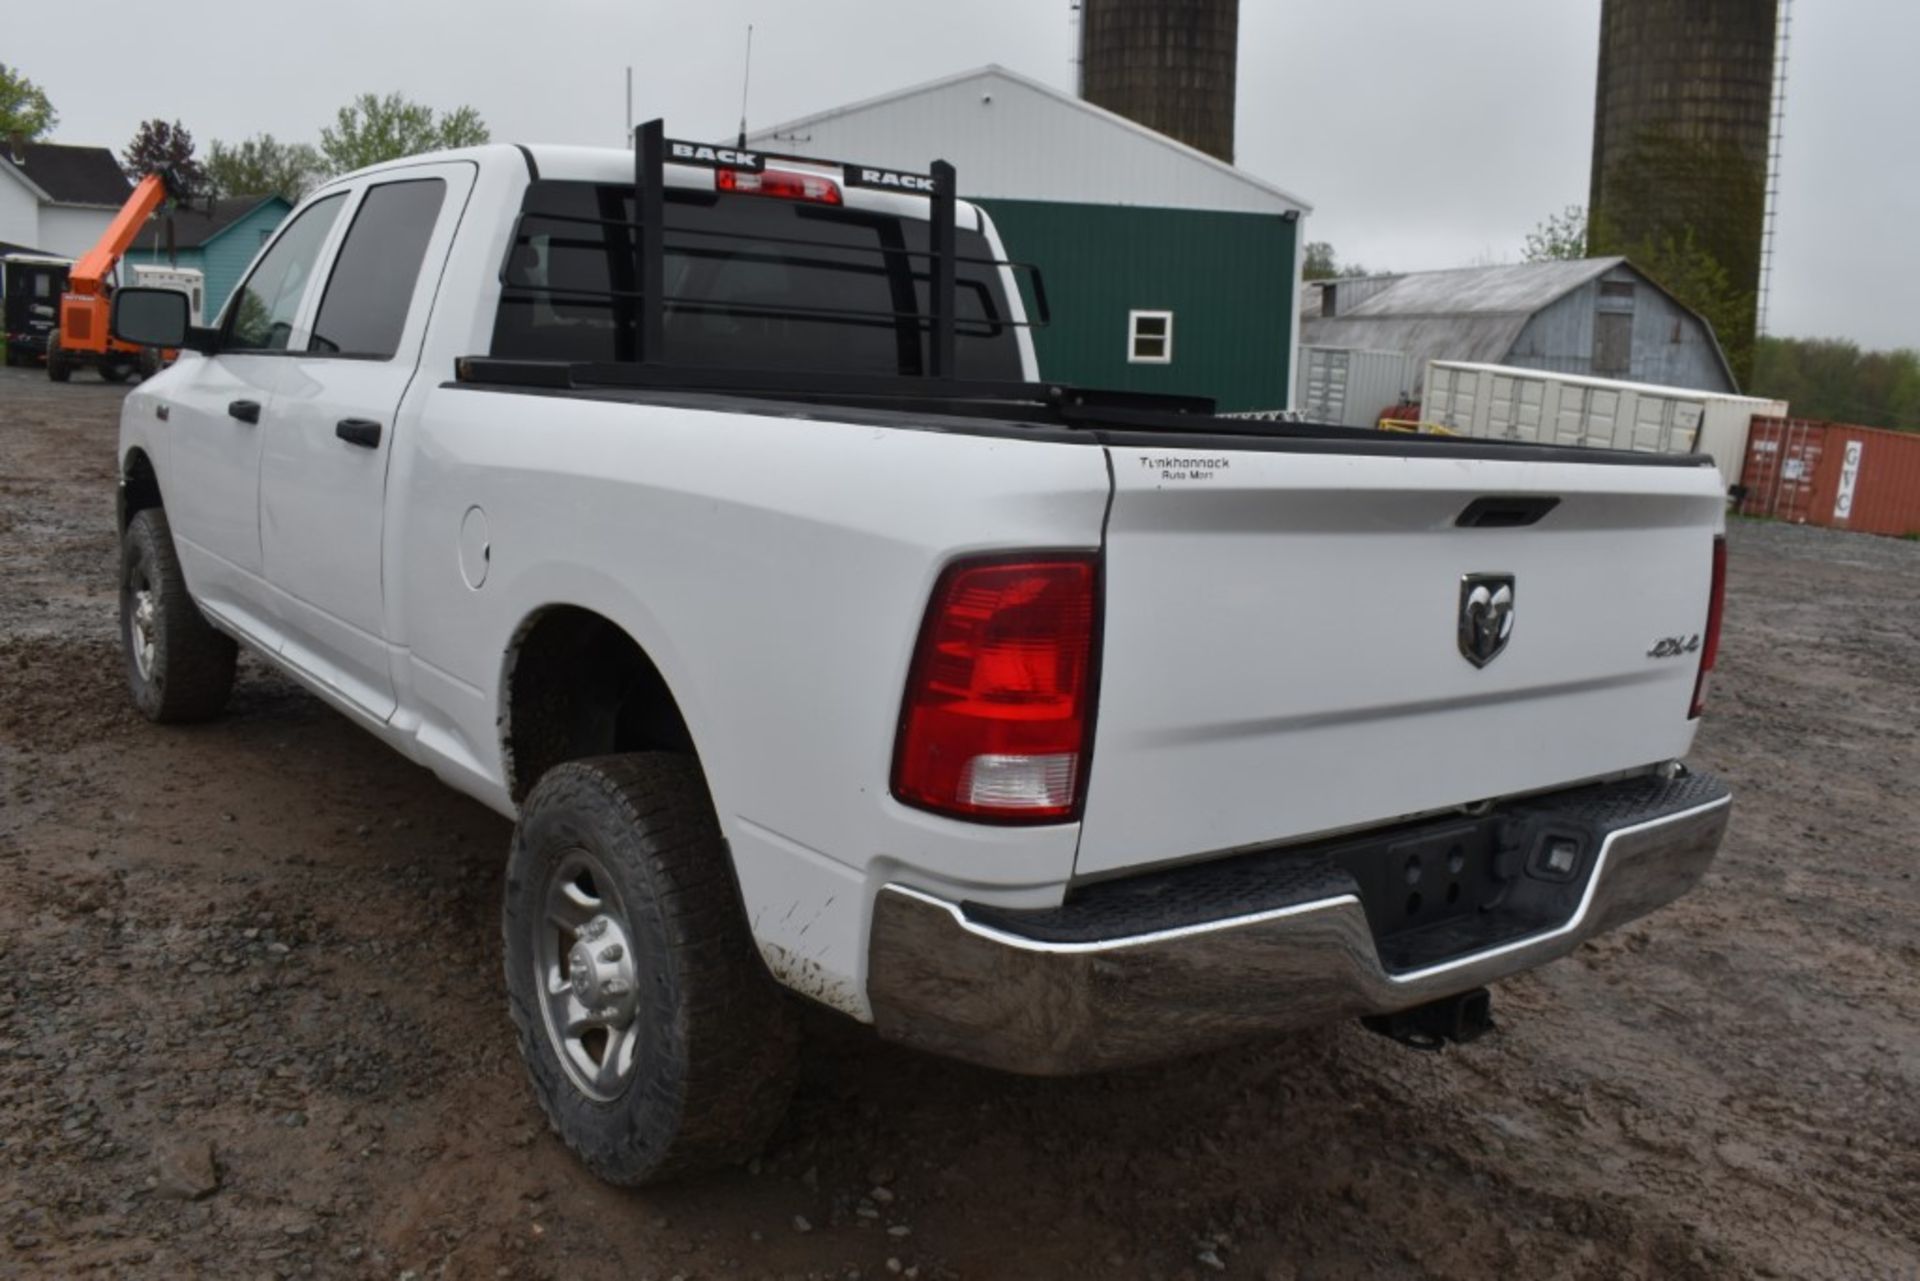 2015 Dodge Ram 2500 Truck With Title, 181238 Miles, Runs and Drives, Hemi 5.7 Gas Engine, Automatic, - Image 7 of 23